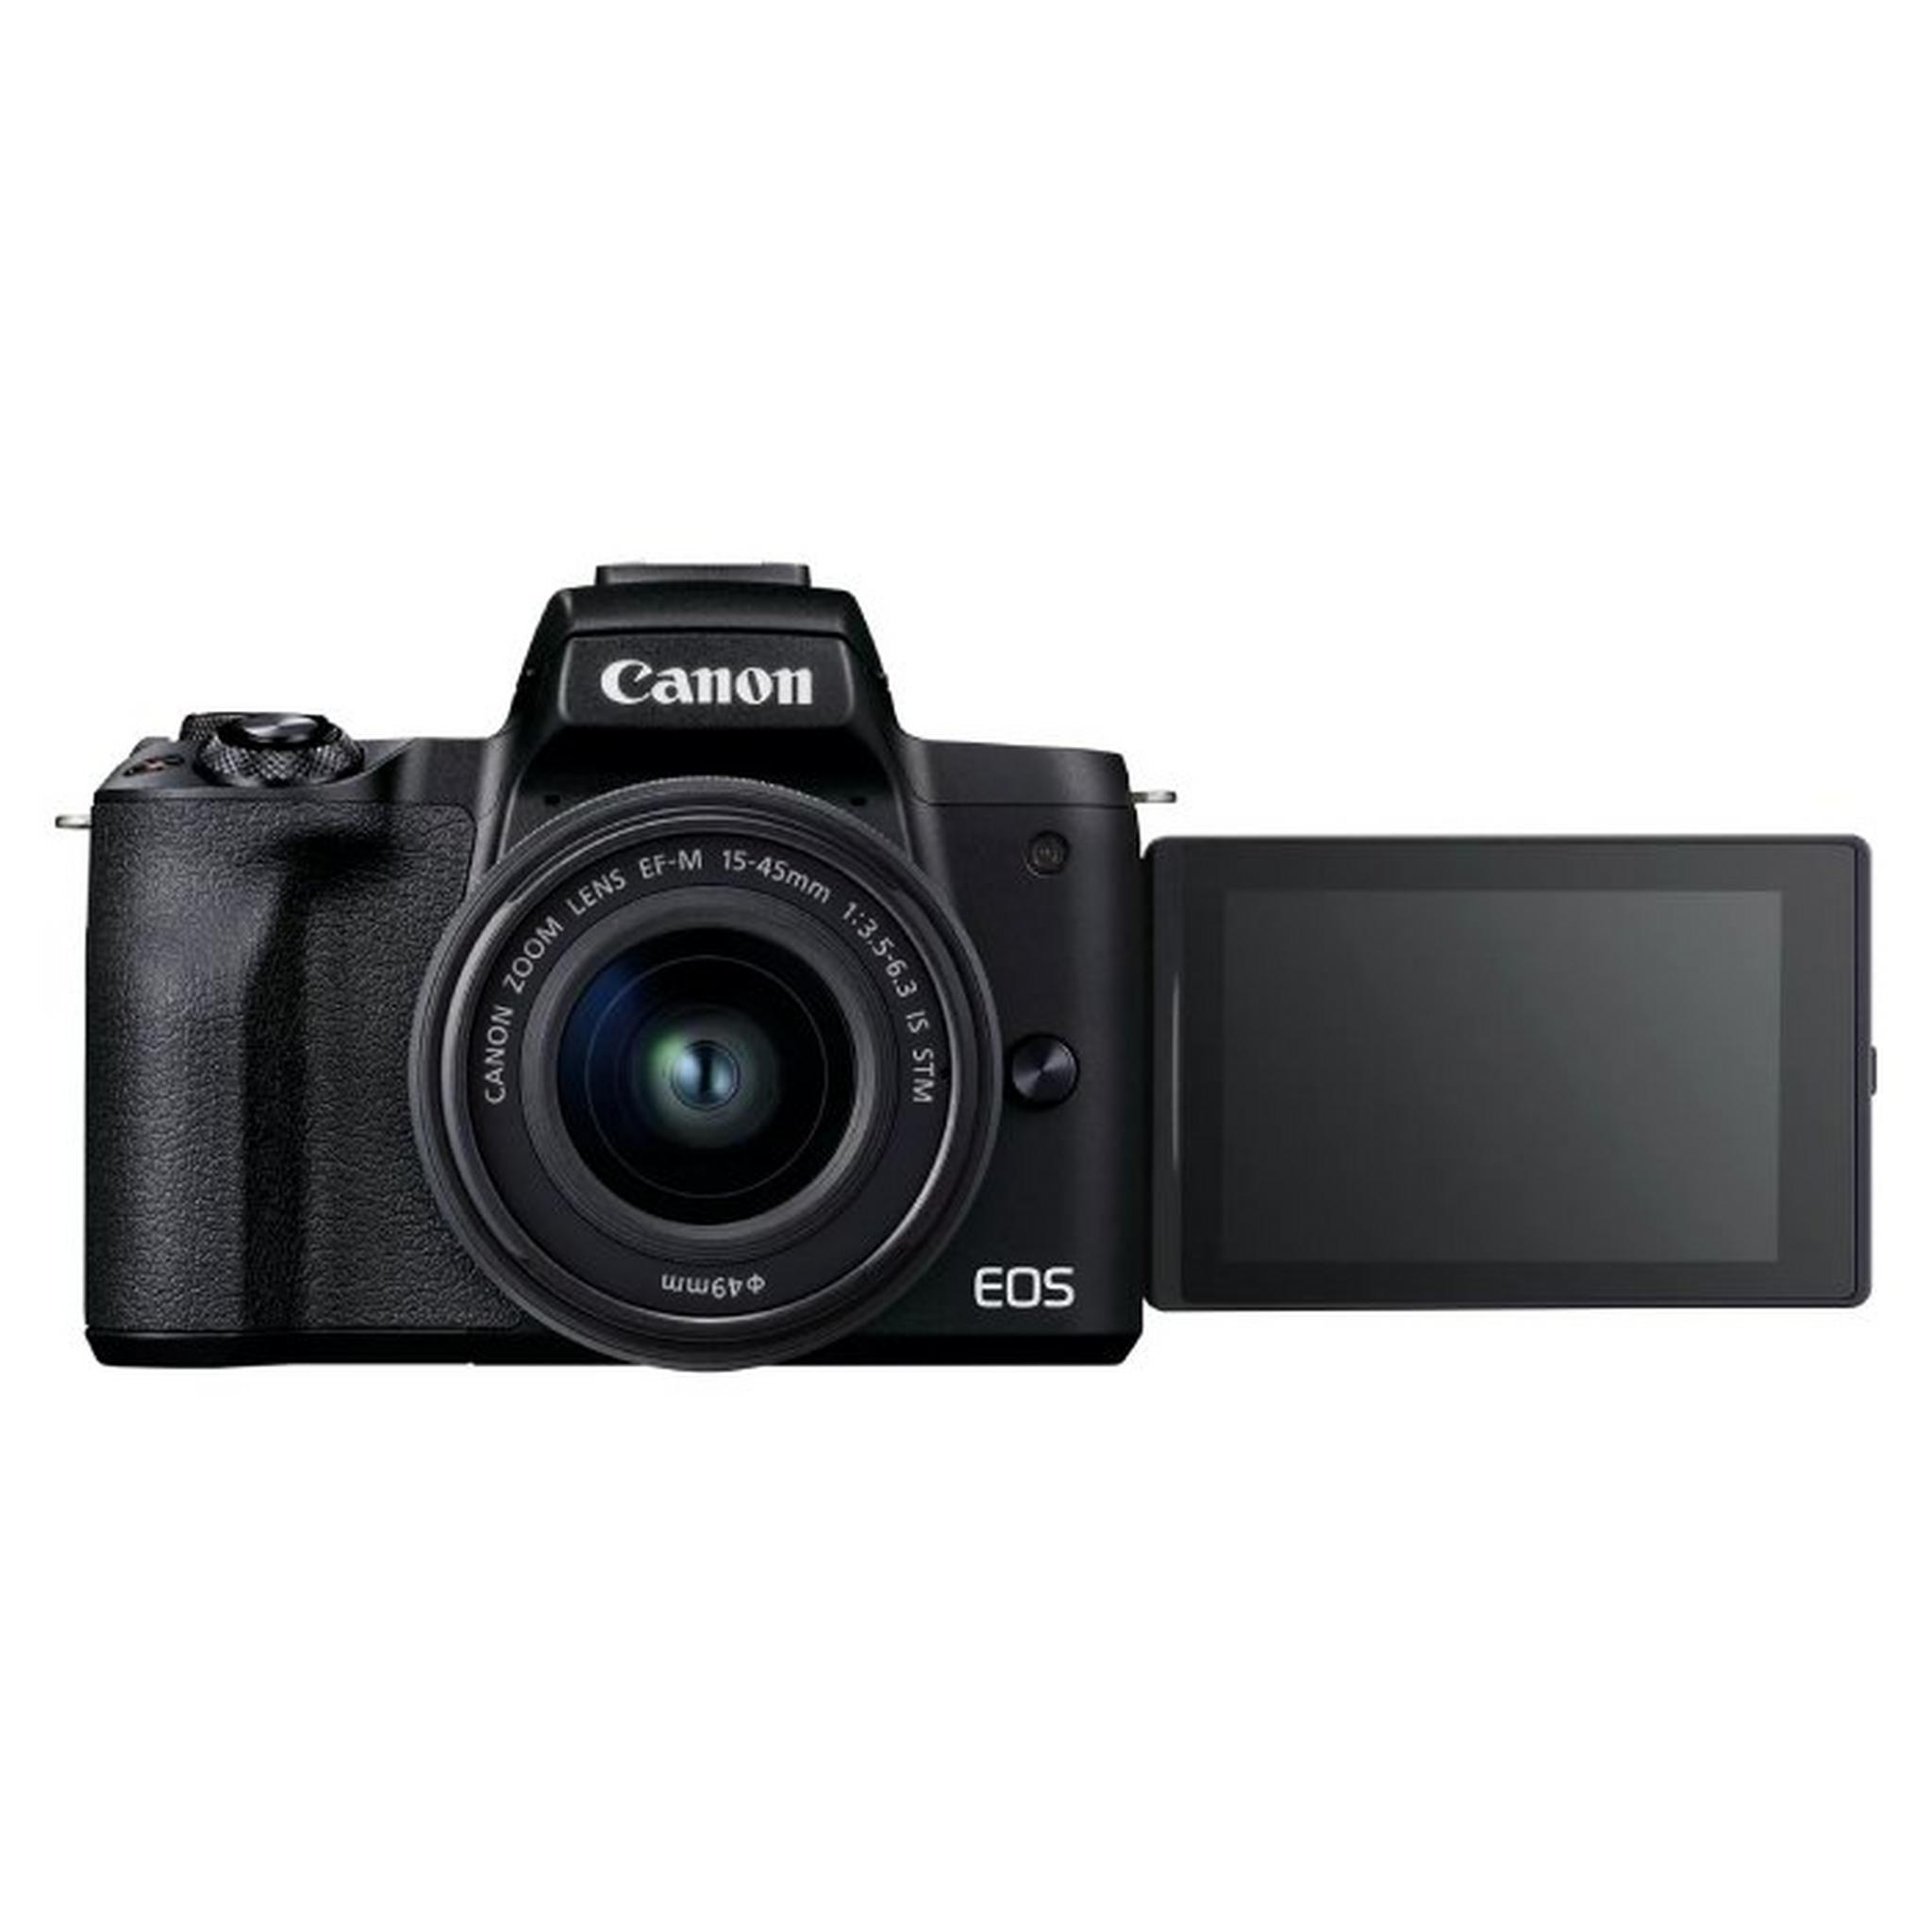 Canon EOS M50 Mark II Mirrorless Camera with 15-45mm Lens - Black